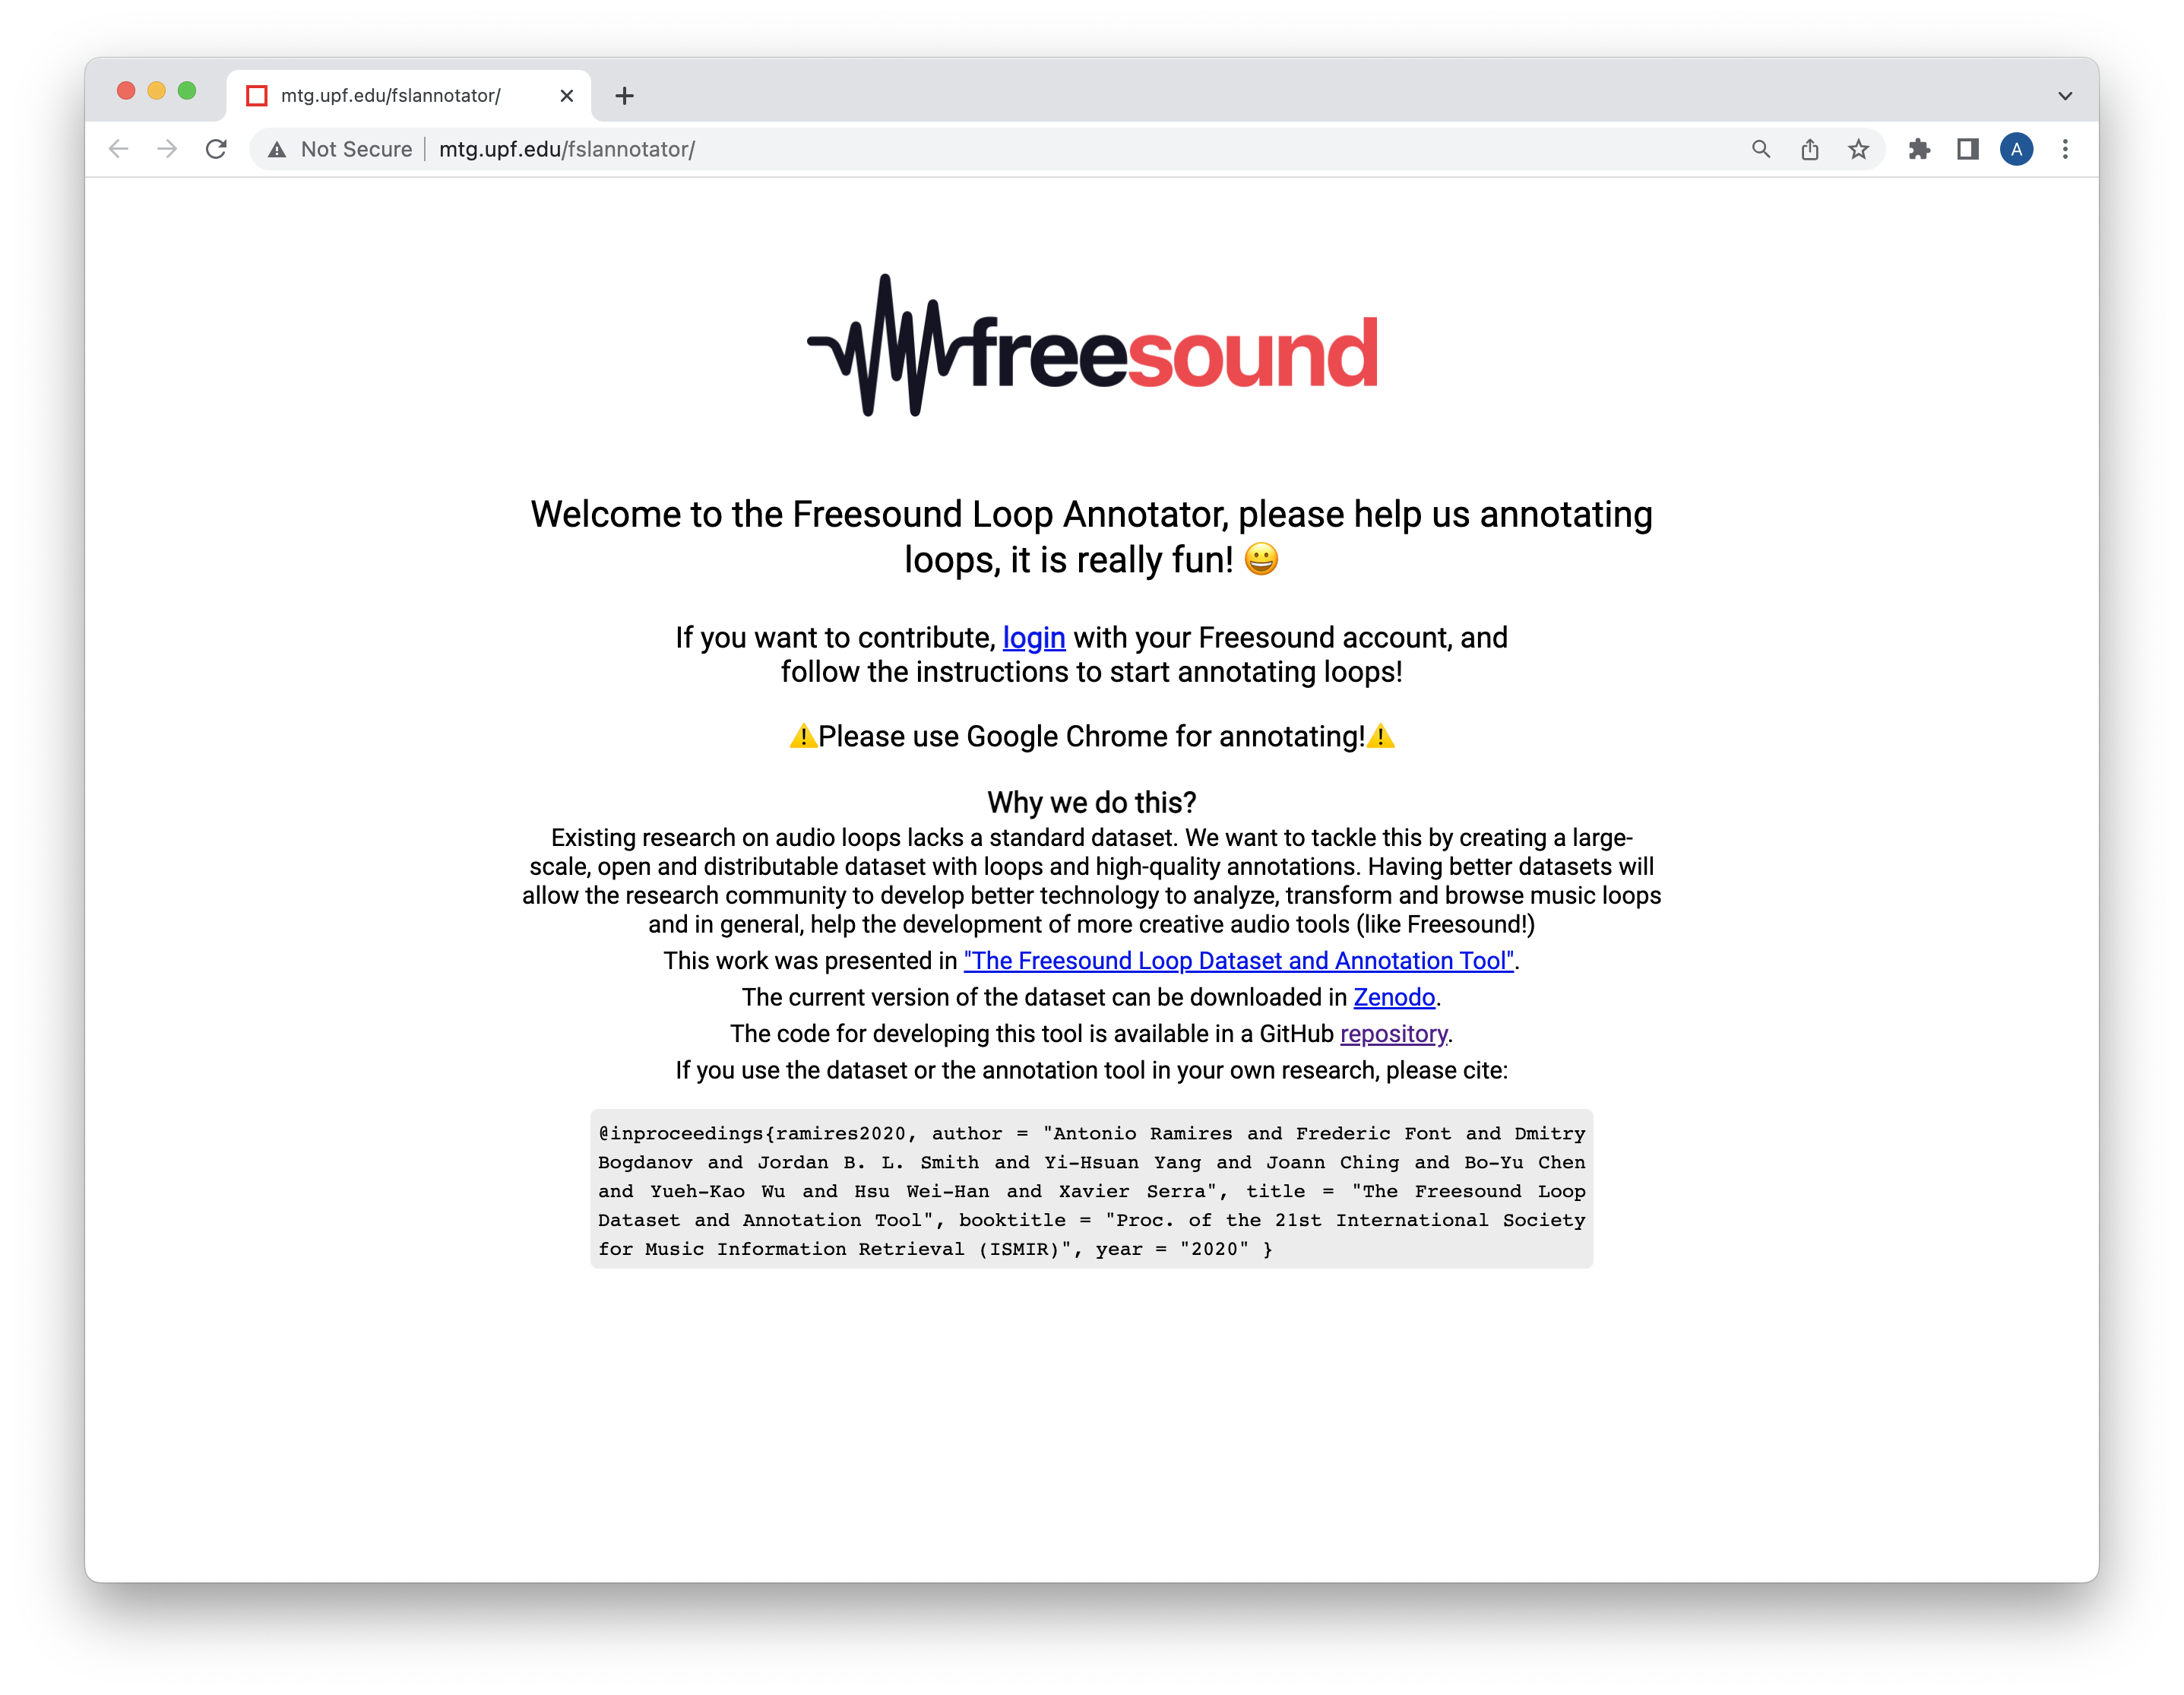 Image of Freesound Loop Annotator site